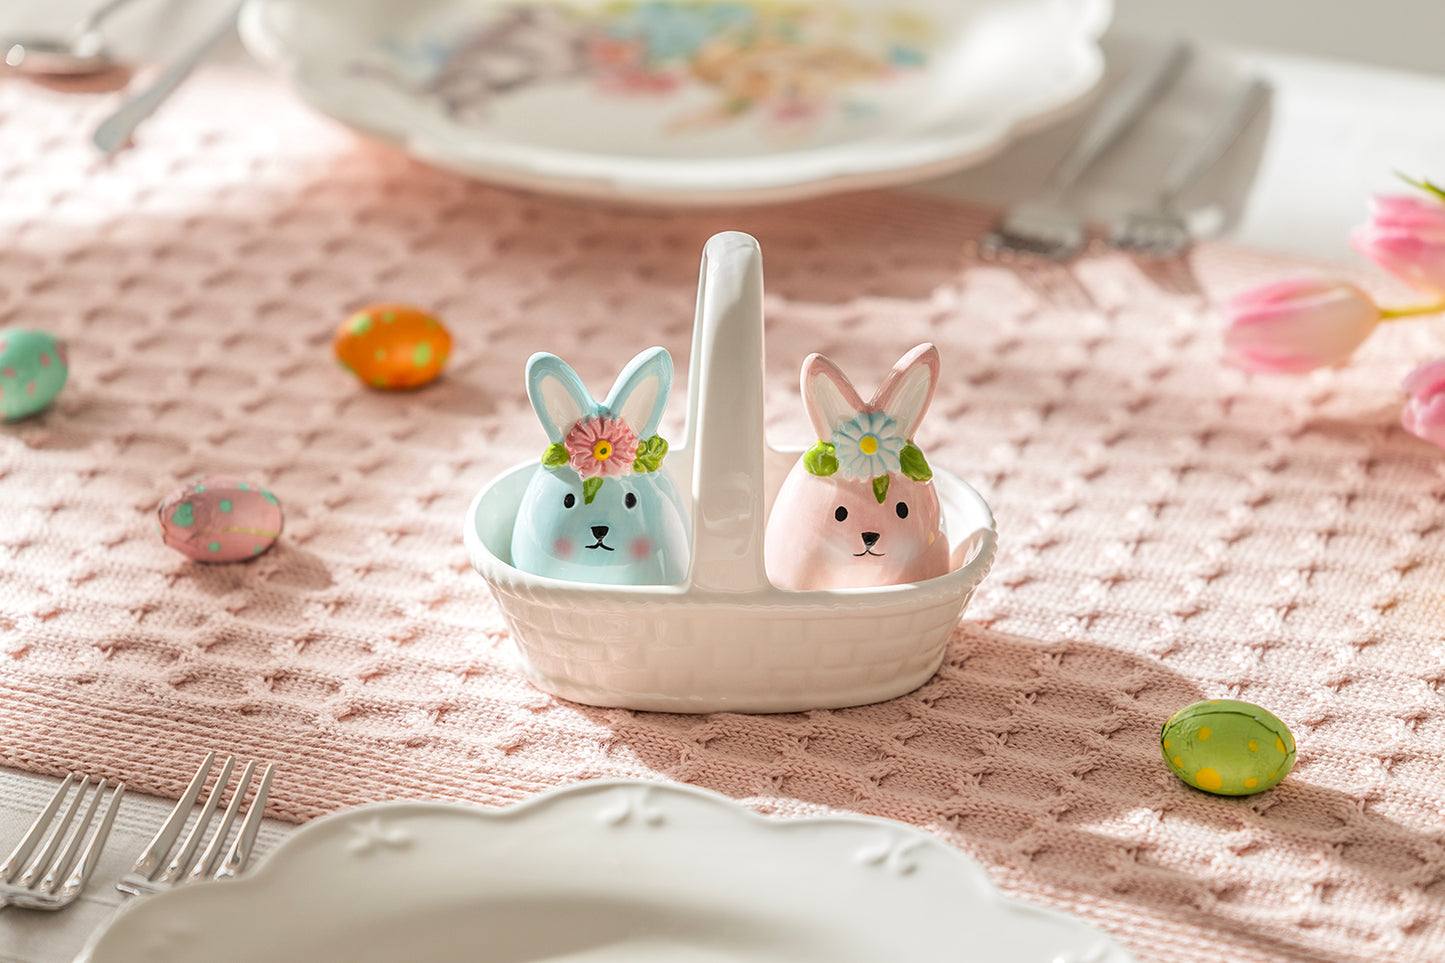 Pink and Blue Egg Bunnies with White Basket Ceramic Salt and Pepper Shaker Set